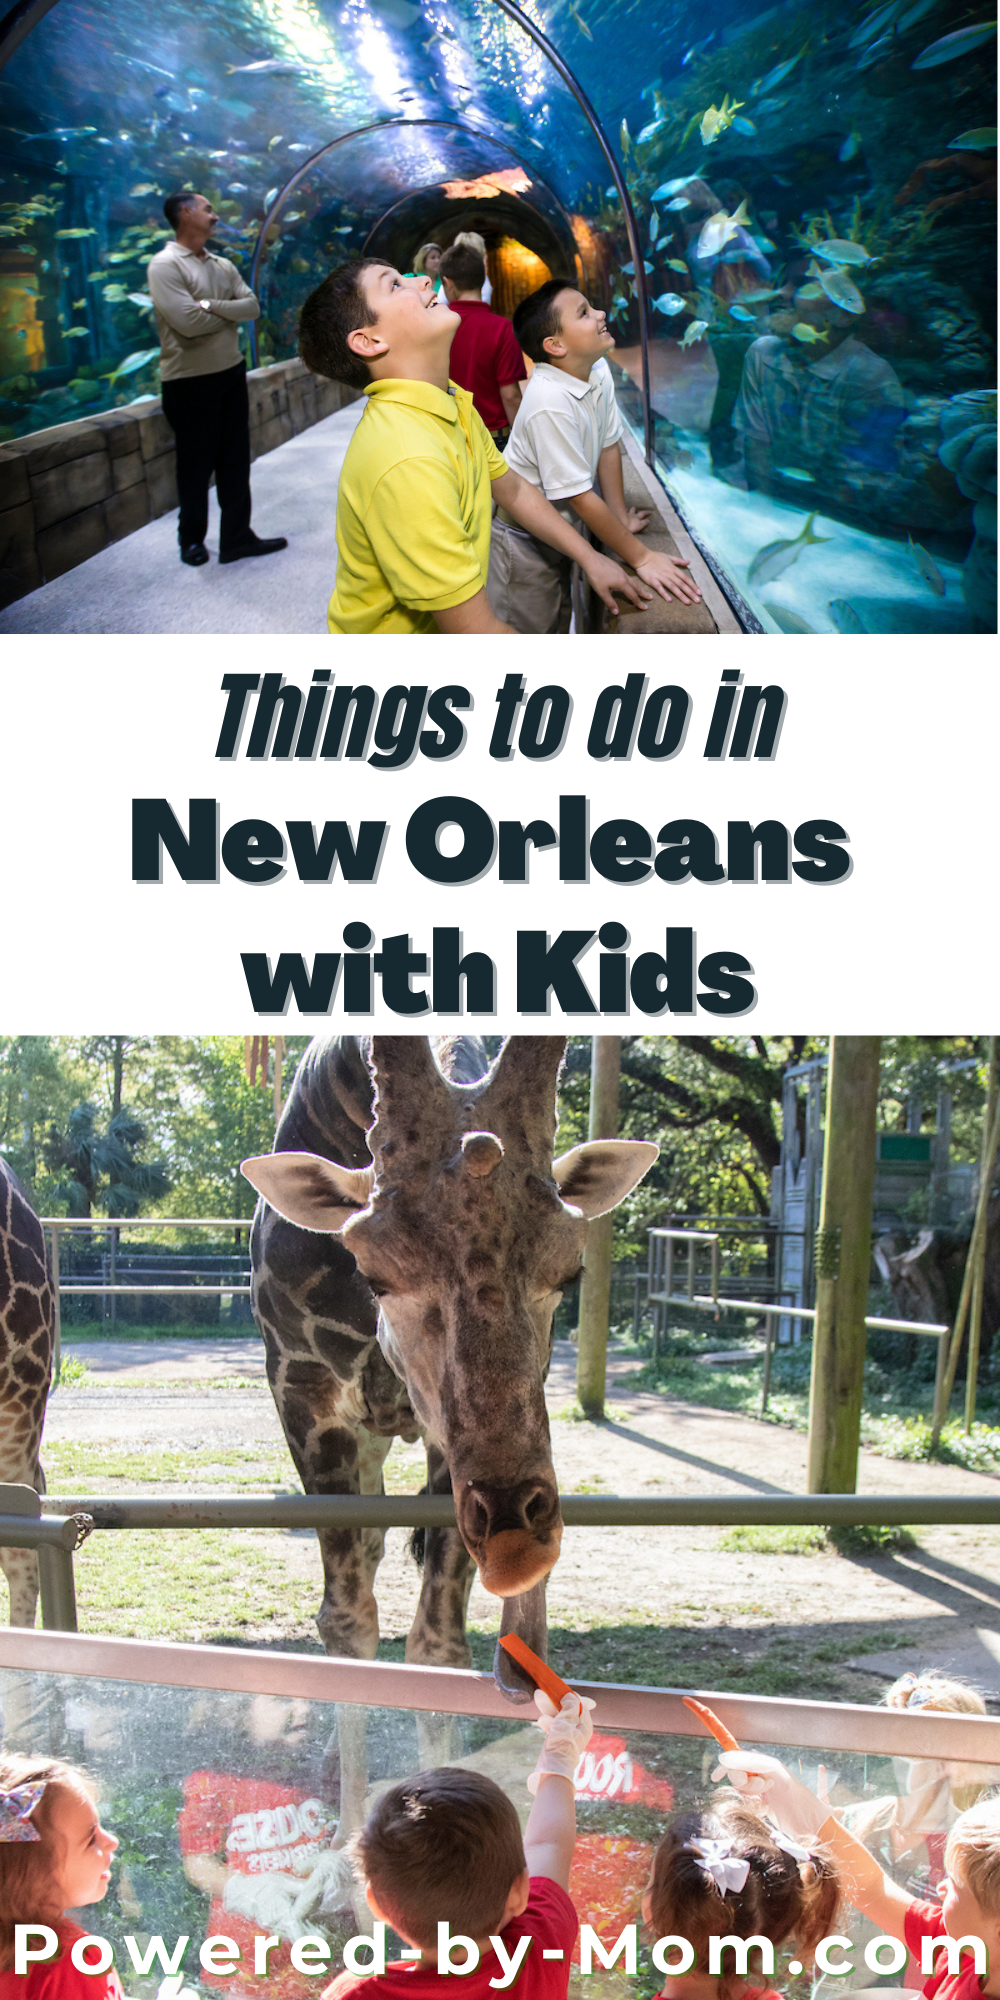 From museums, to tours, to taste testing the city’s most famous bites, there are all kinds of things to do in New Orleans with kids.